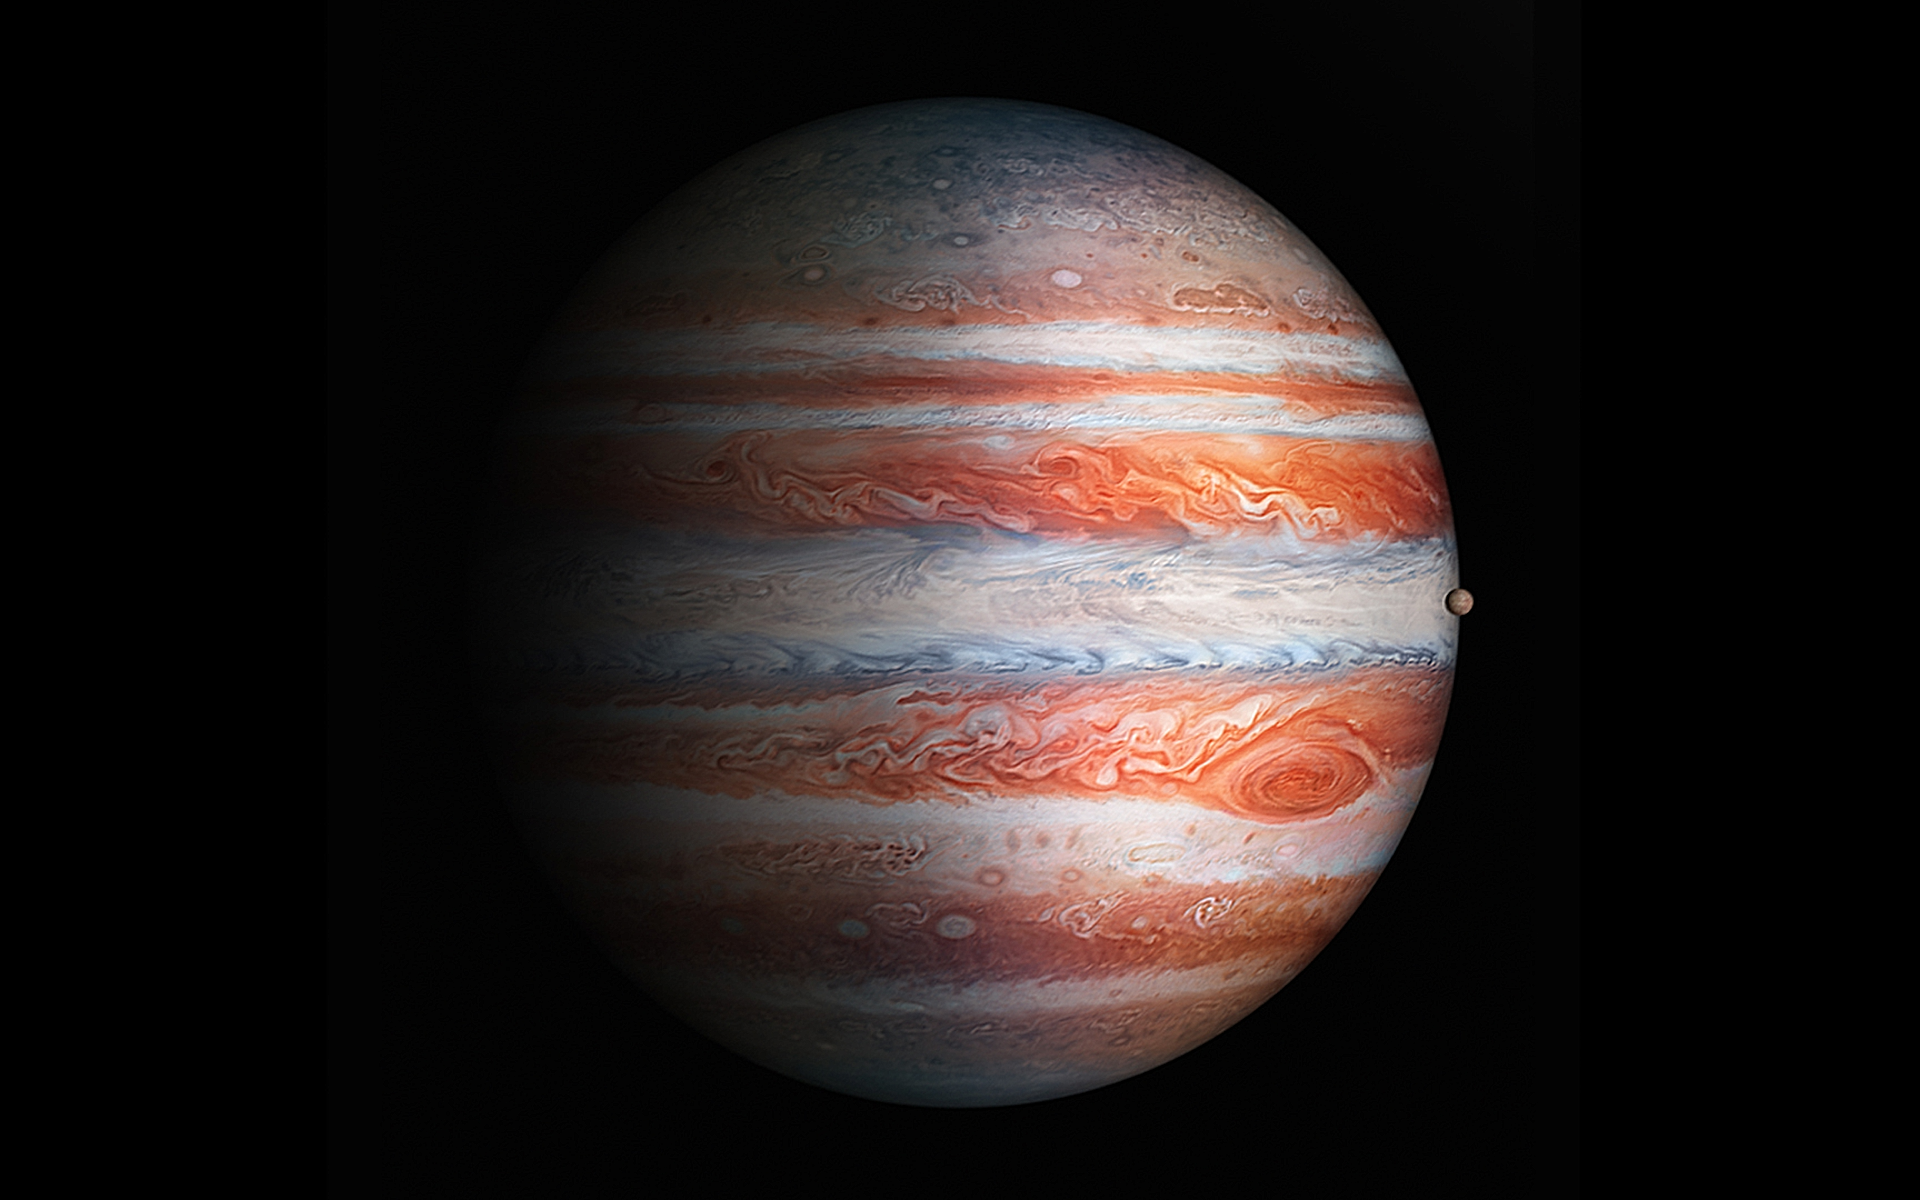 iPad ProiPhone Jupiter Wallpaper Iphone Wallpapers in 2019